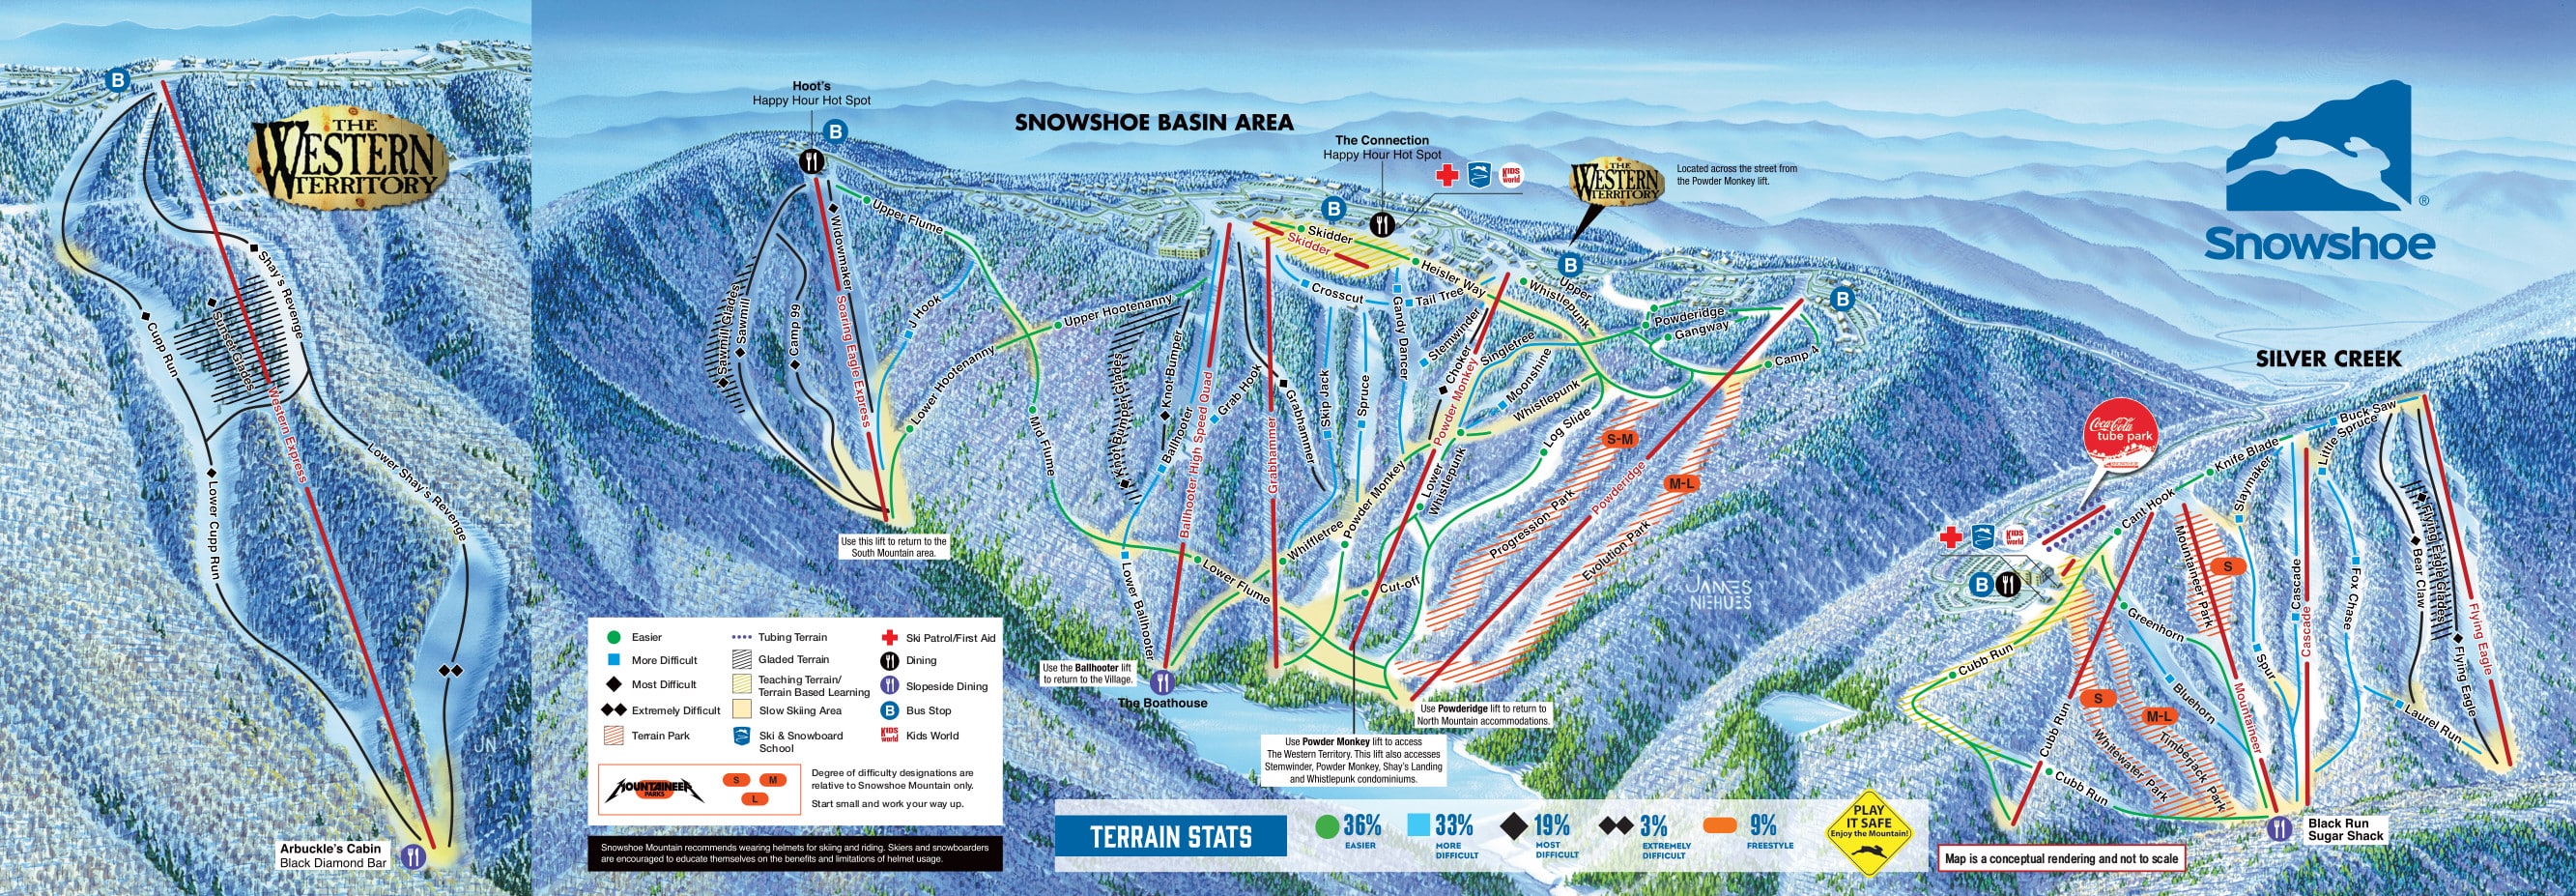 Snowshoe Mountain Resort Piste Map / Trail Map (high res.)